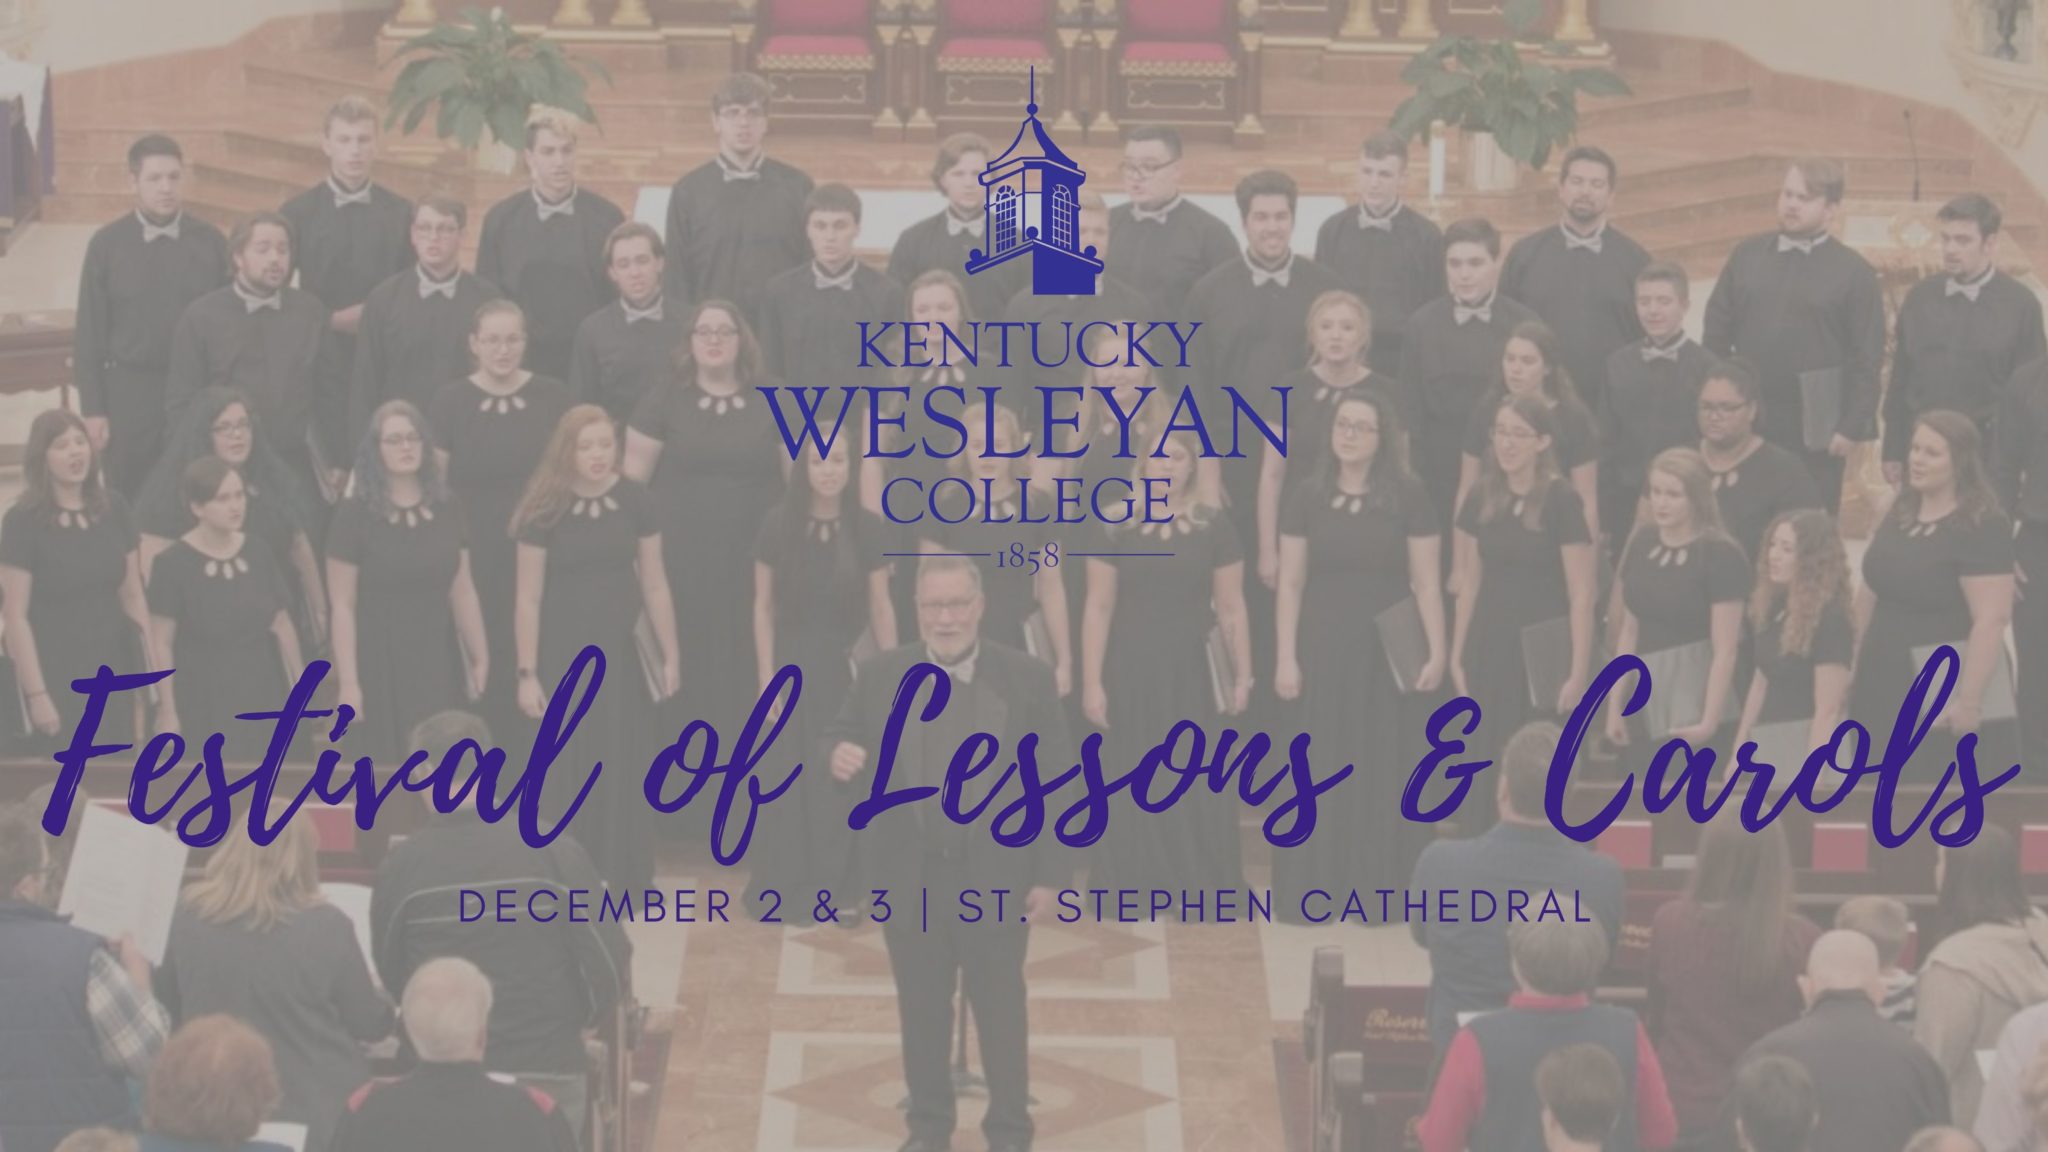 Kentucky Wesleyan College to present Festival of Lessons & Carols at St